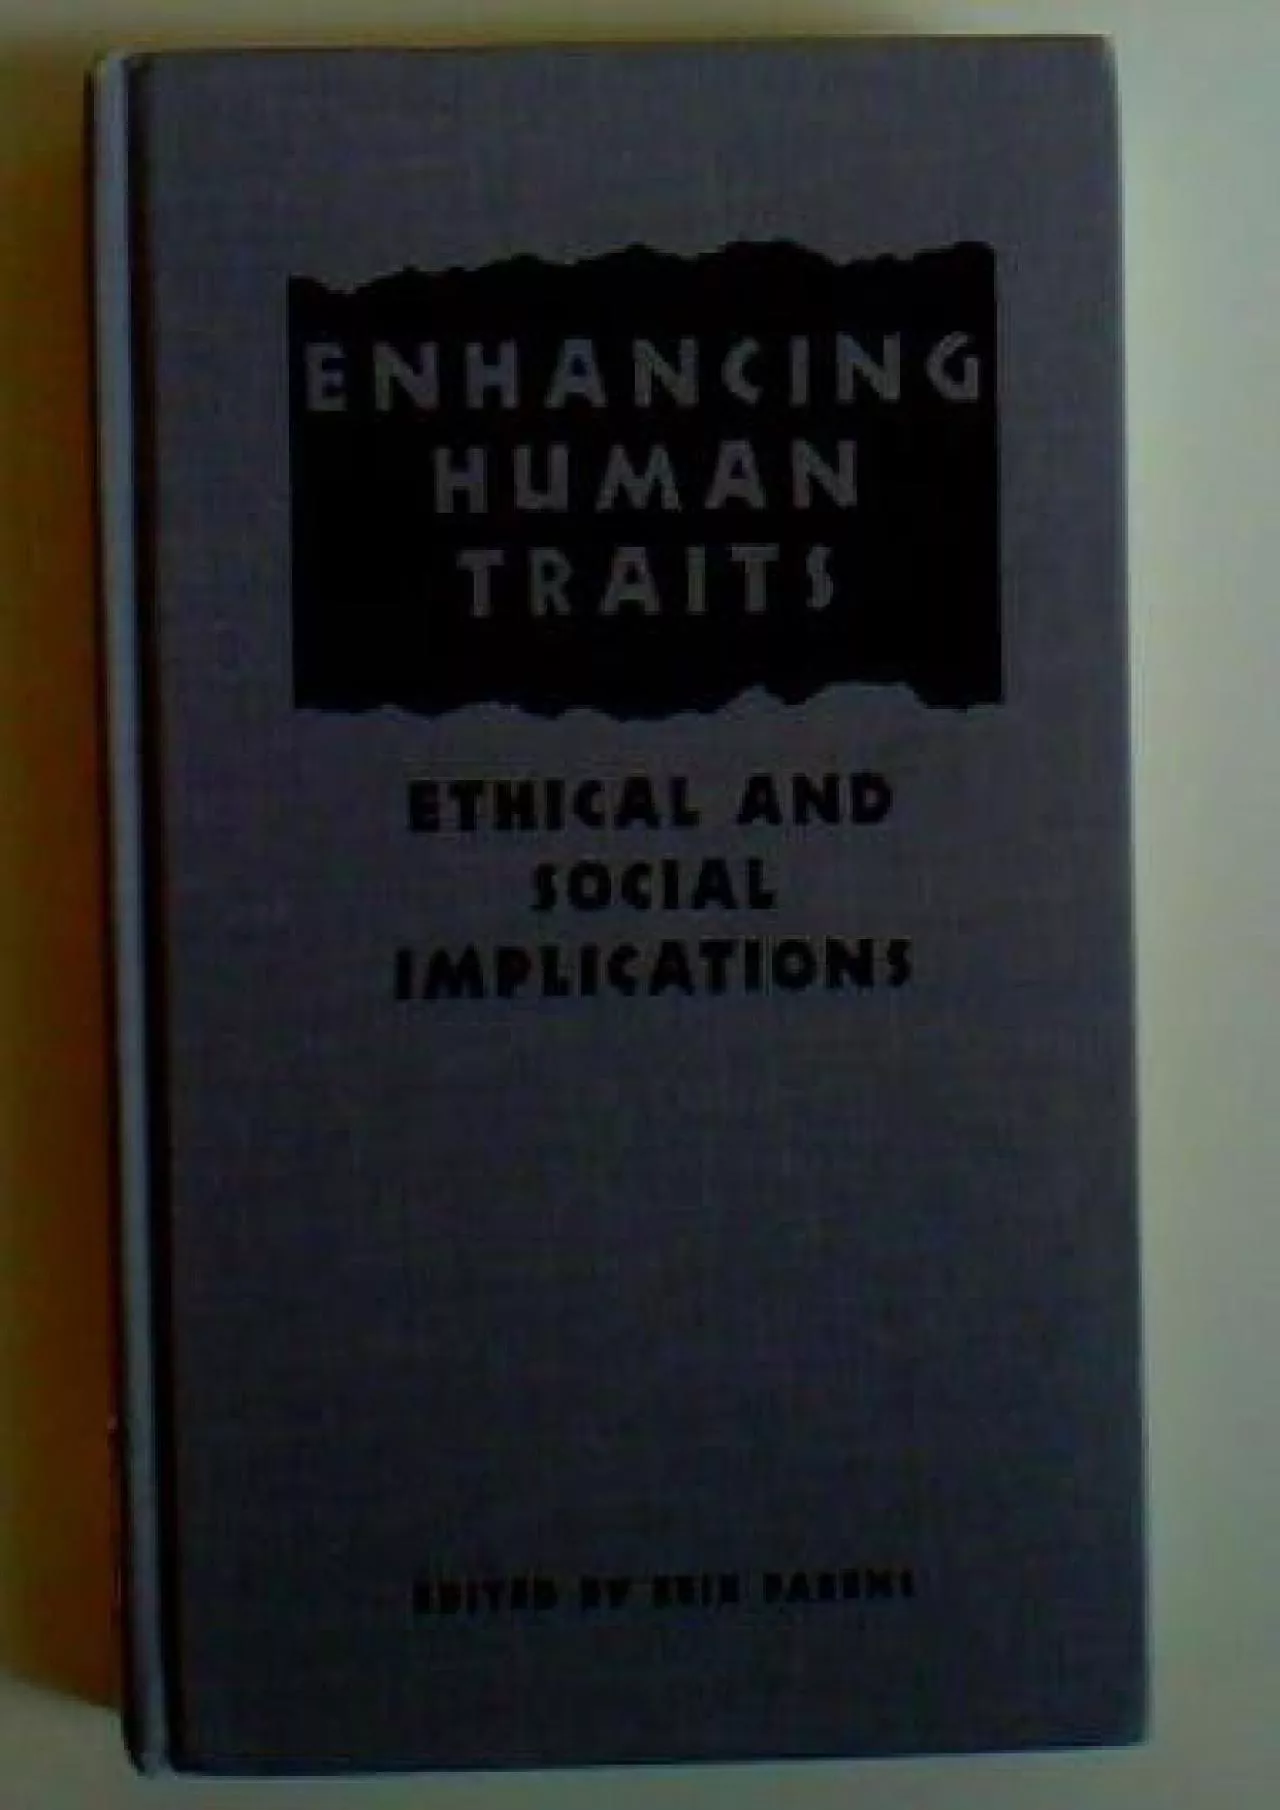 (DOWNLOAD)-Enhancing Human Traits: Ethical and Social Implications (Hastings Center Studies